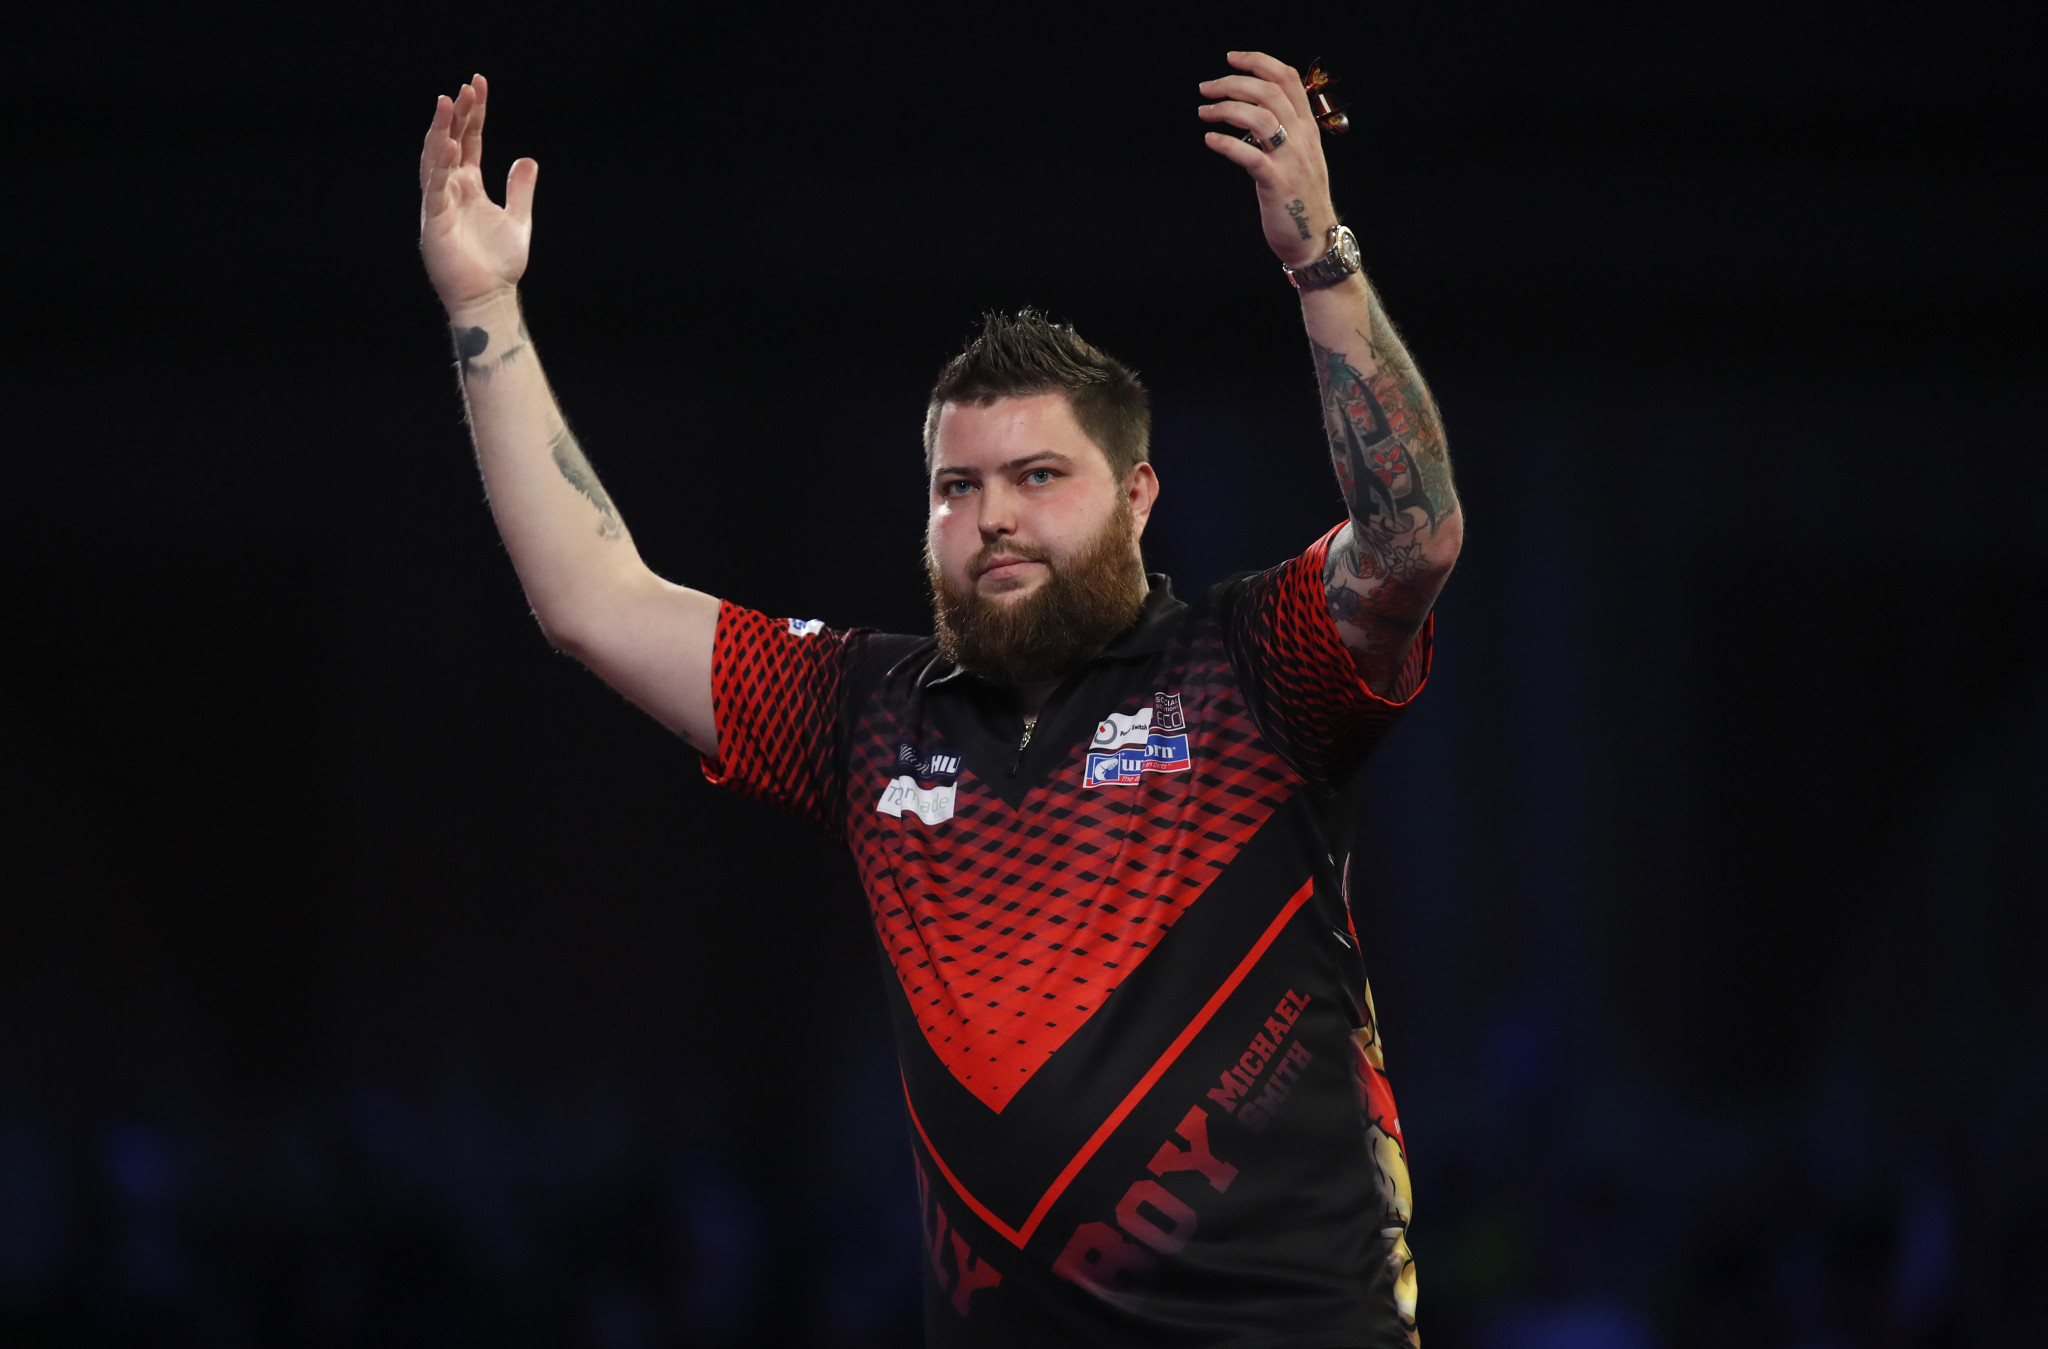 Michael Smith was left frustrated by missed doubles and Peter Wright's brilliant form in key moments ©Getty Images